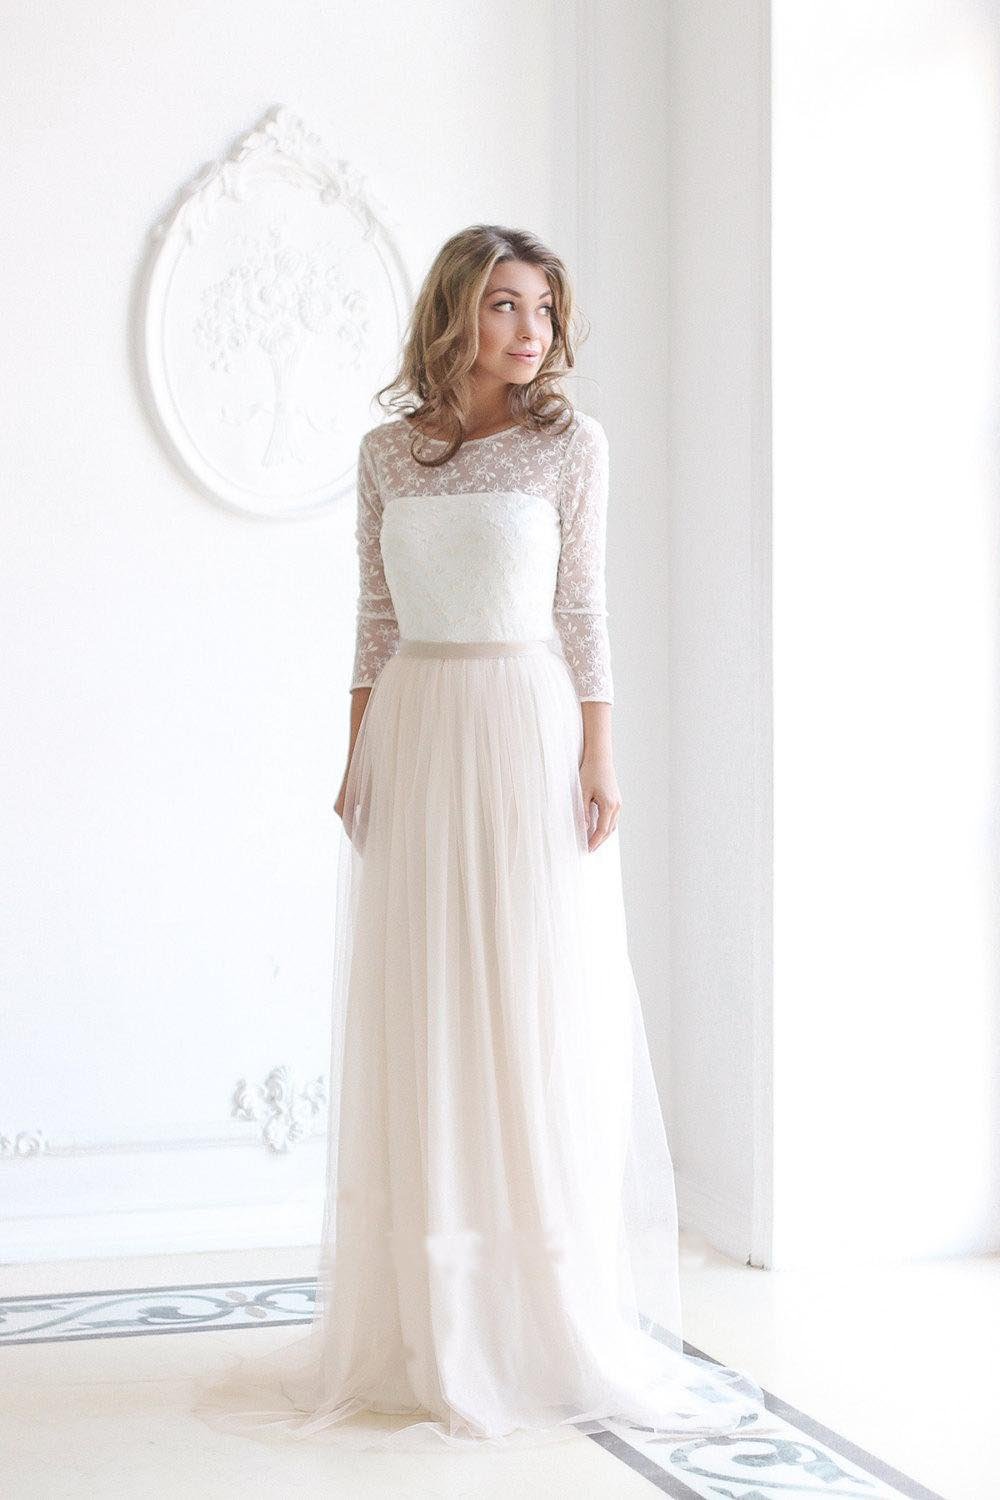 Scoop Neck Long Sleeve Tulle Wedding Dress With Lace Bodice V Back Wedding Gowns RS512